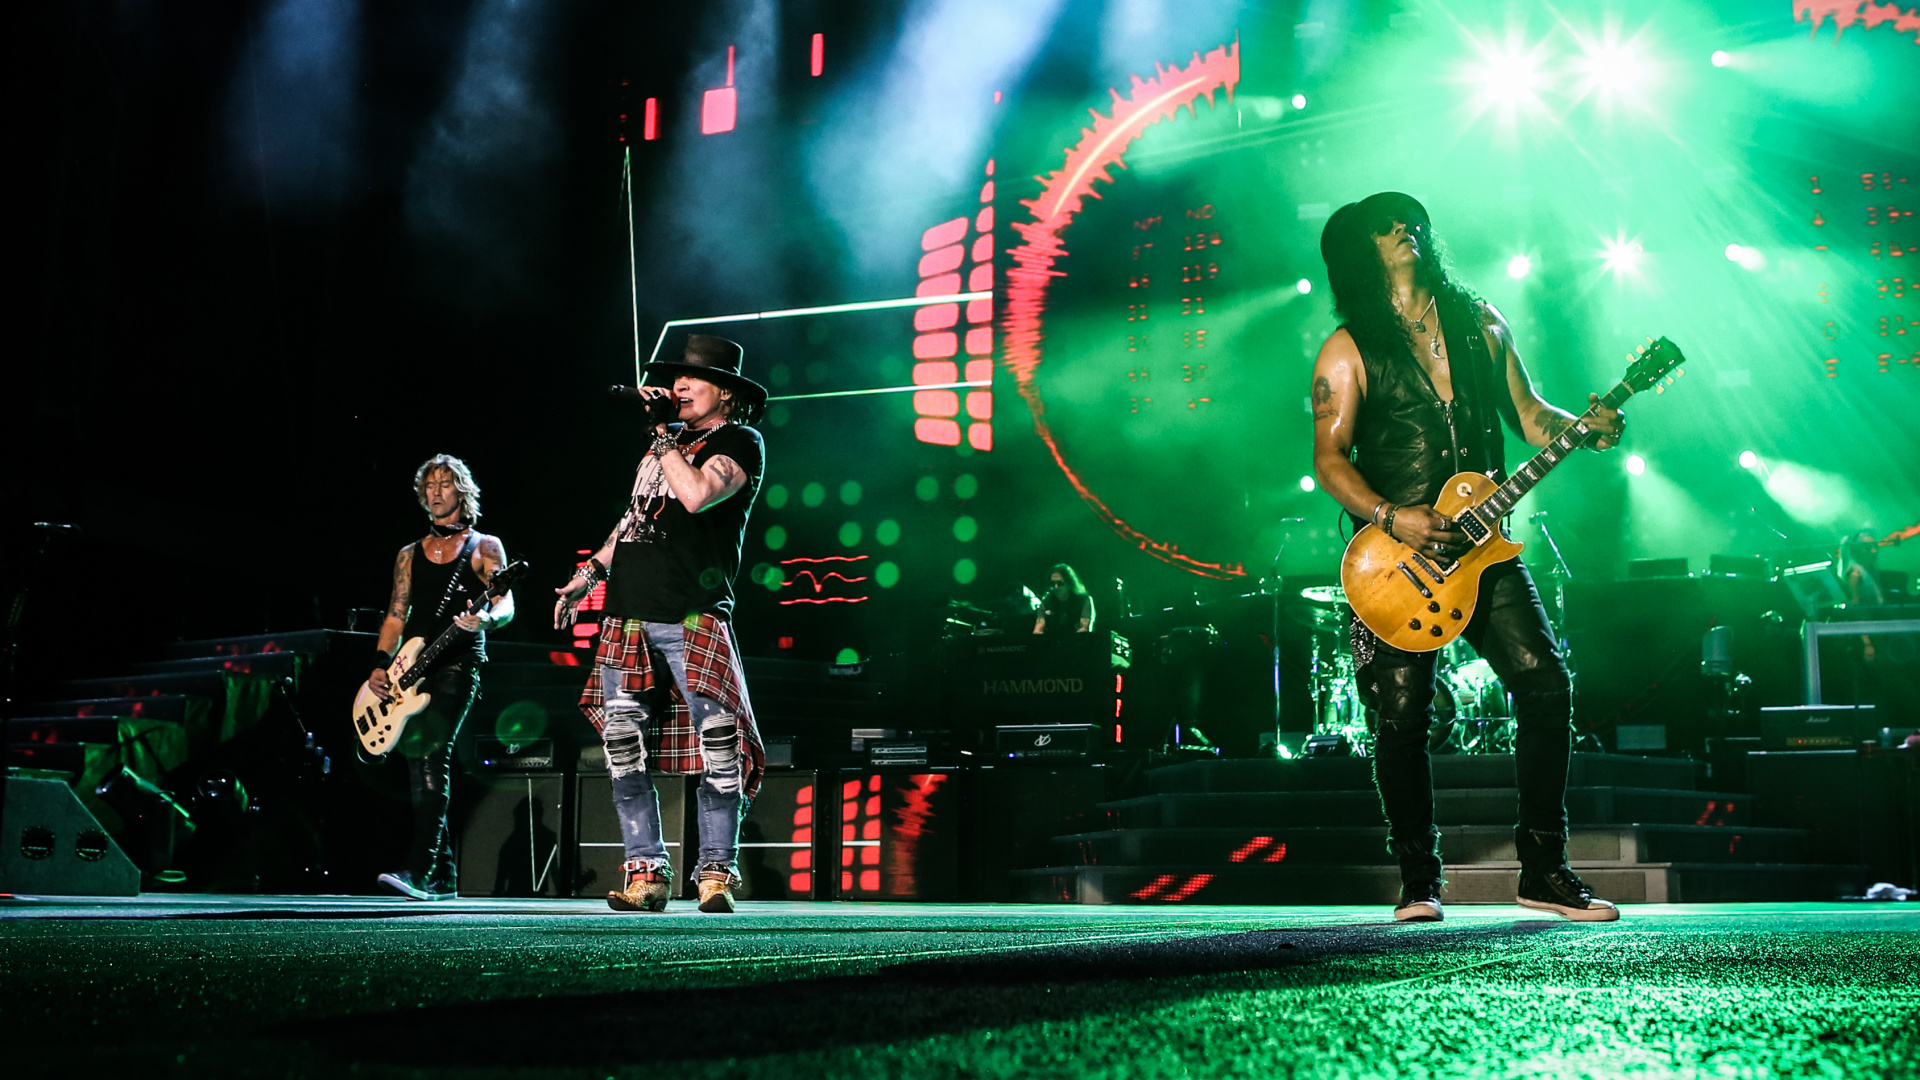 Not in This Lifetime Tour, Guns N Roses, Rock Concert, Performance, Entertainment. Wallpaper in 1920x1080 Resolution